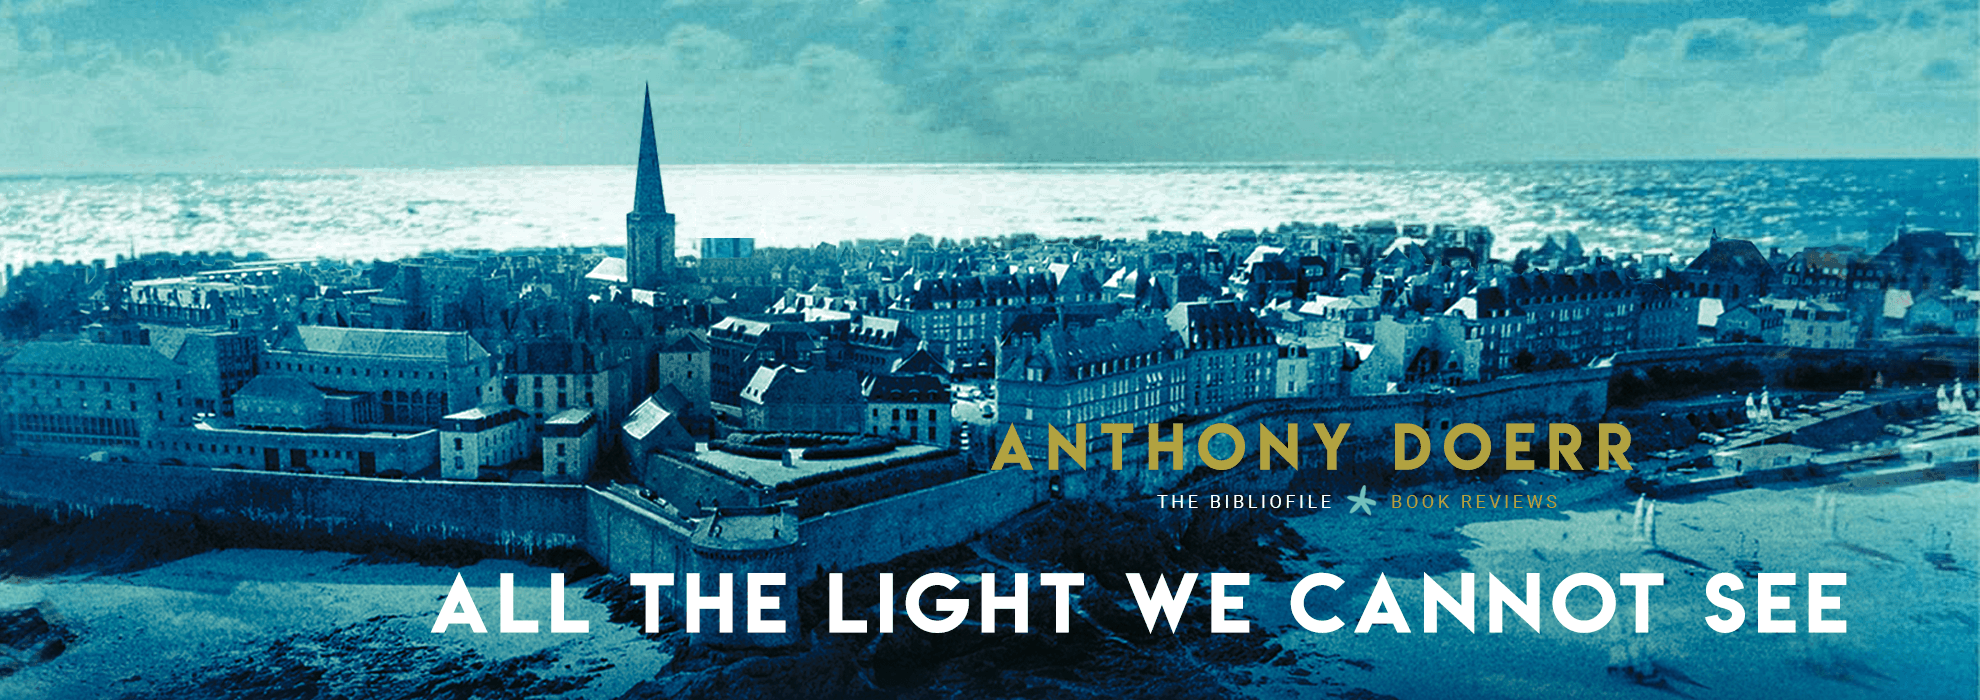 Jeg har erkendt det gård købmand Summary and Review: All the Light We Cannot See by Anthony Doerr - The  Bibliofile